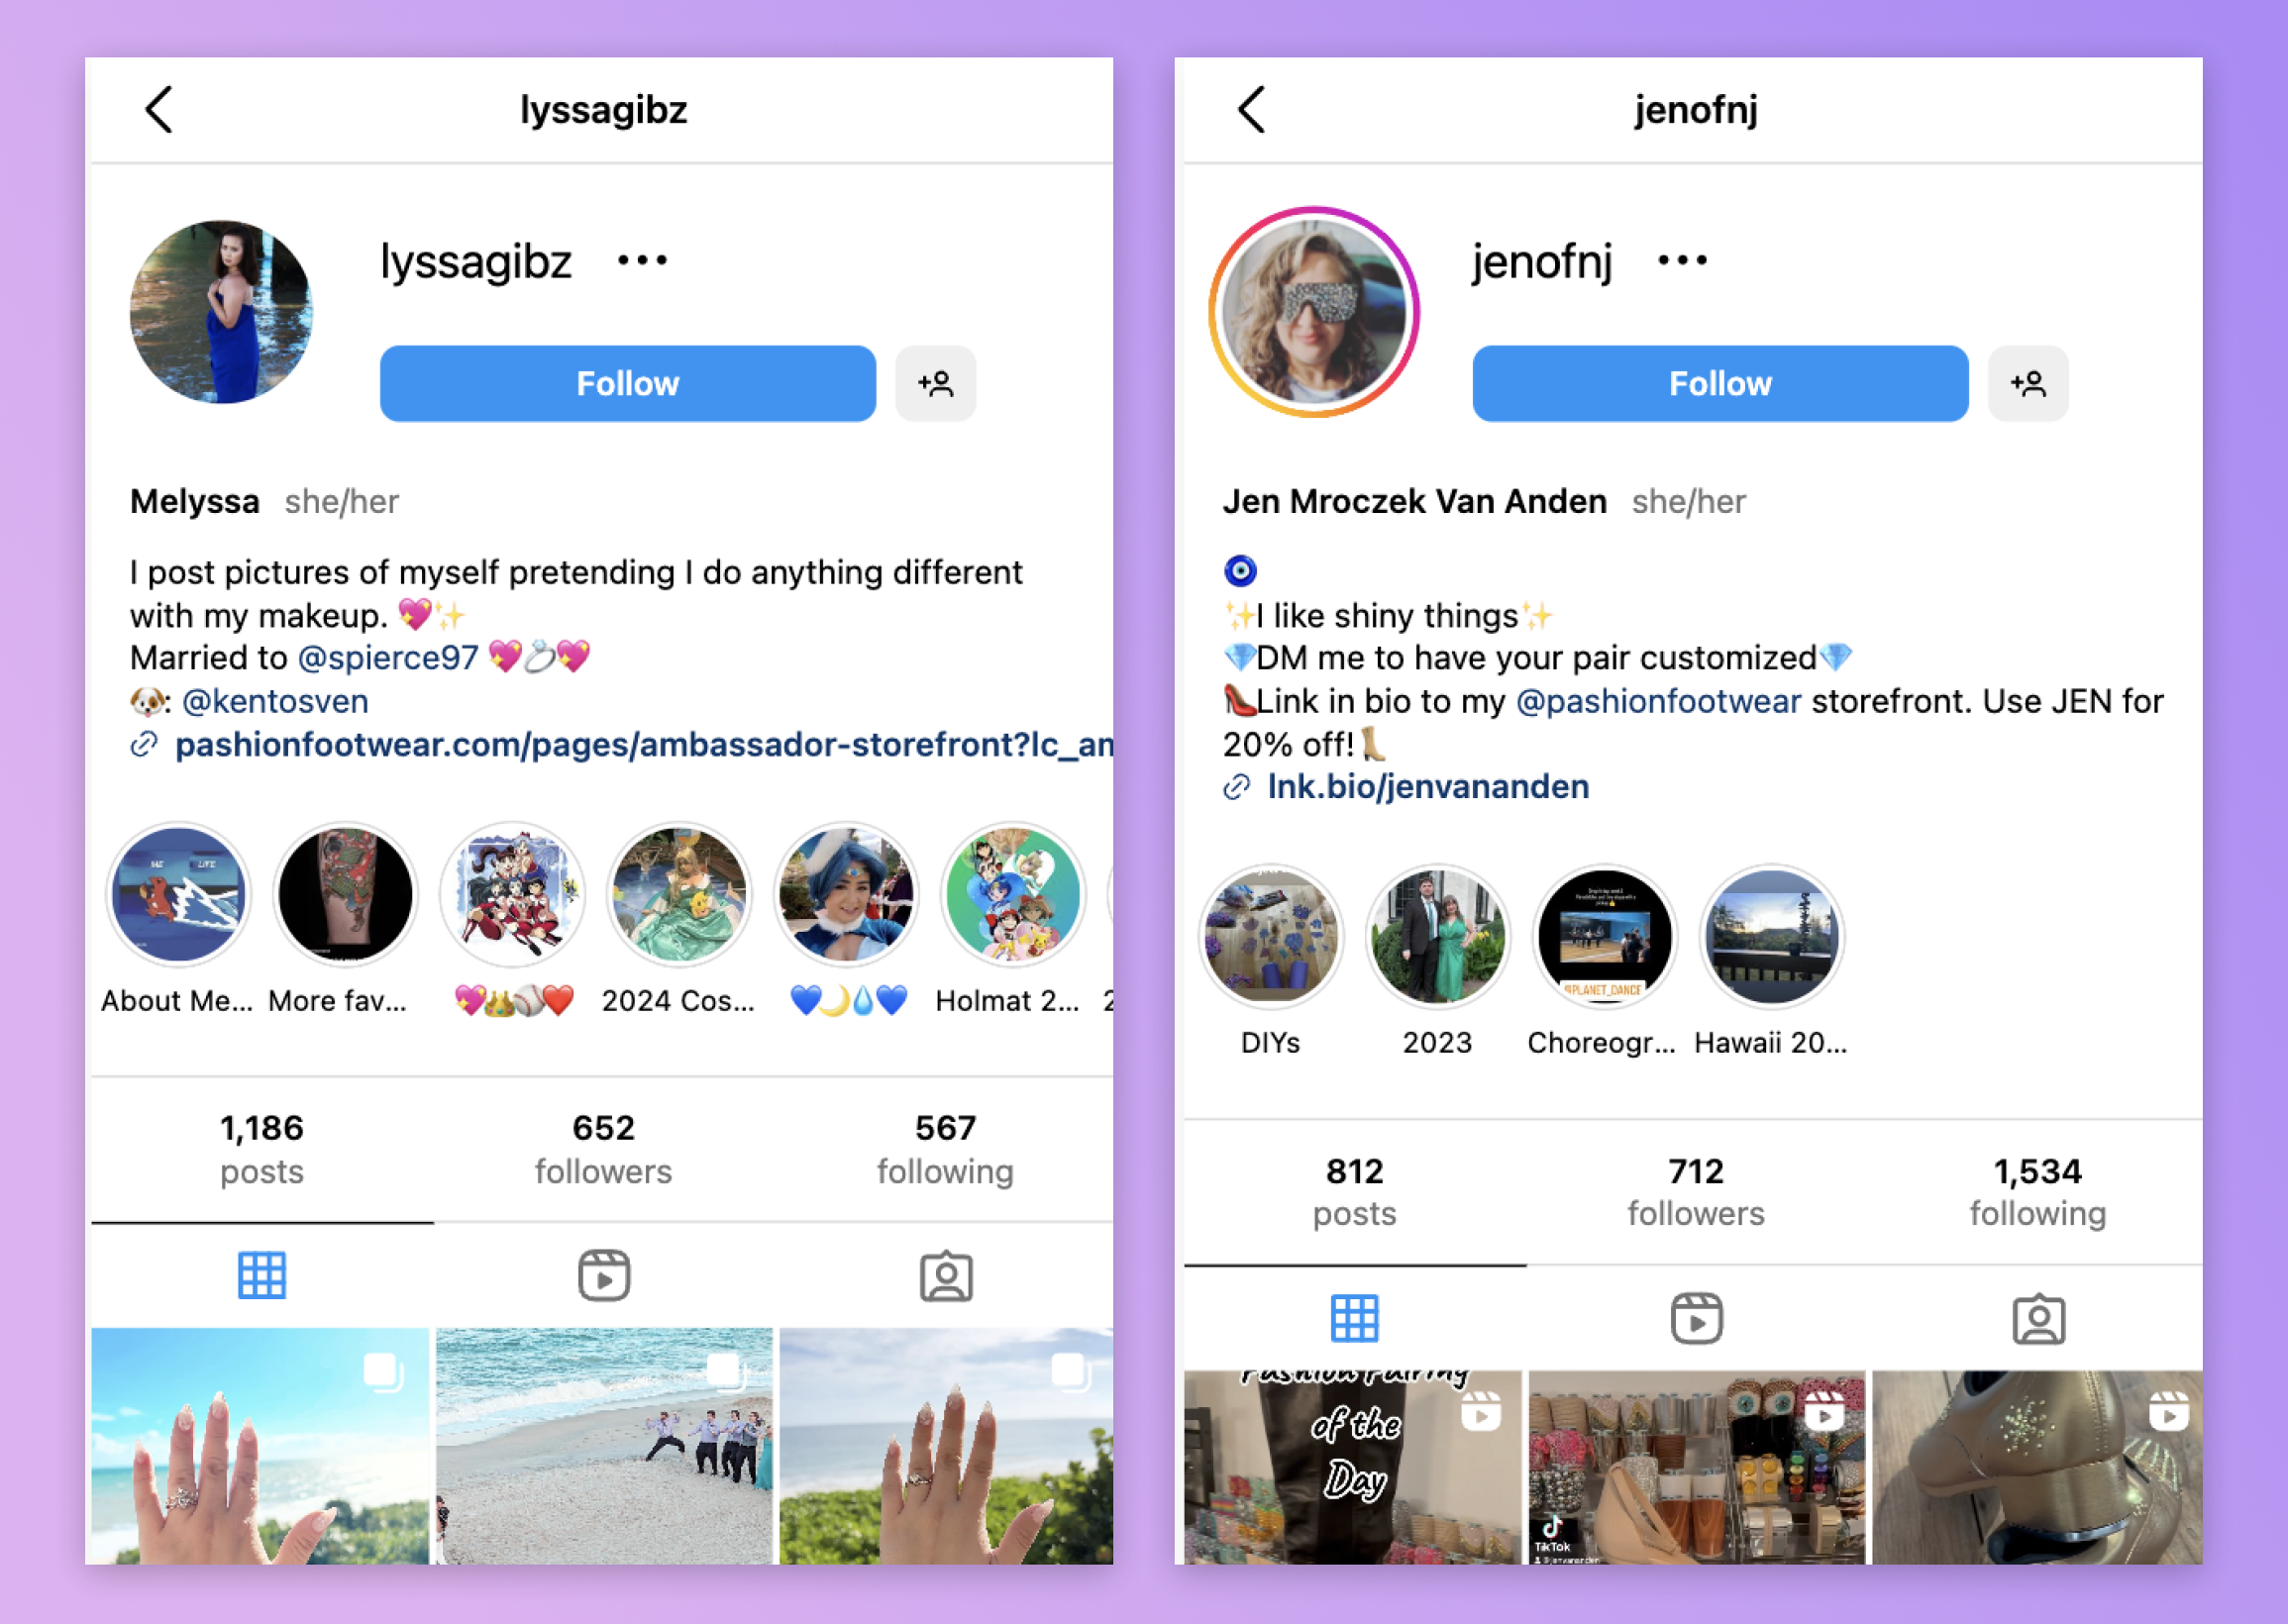 Two creators, Lyssagibz and jenofnj promote their Pashion Storefront and affiliate code in their Instagram bios